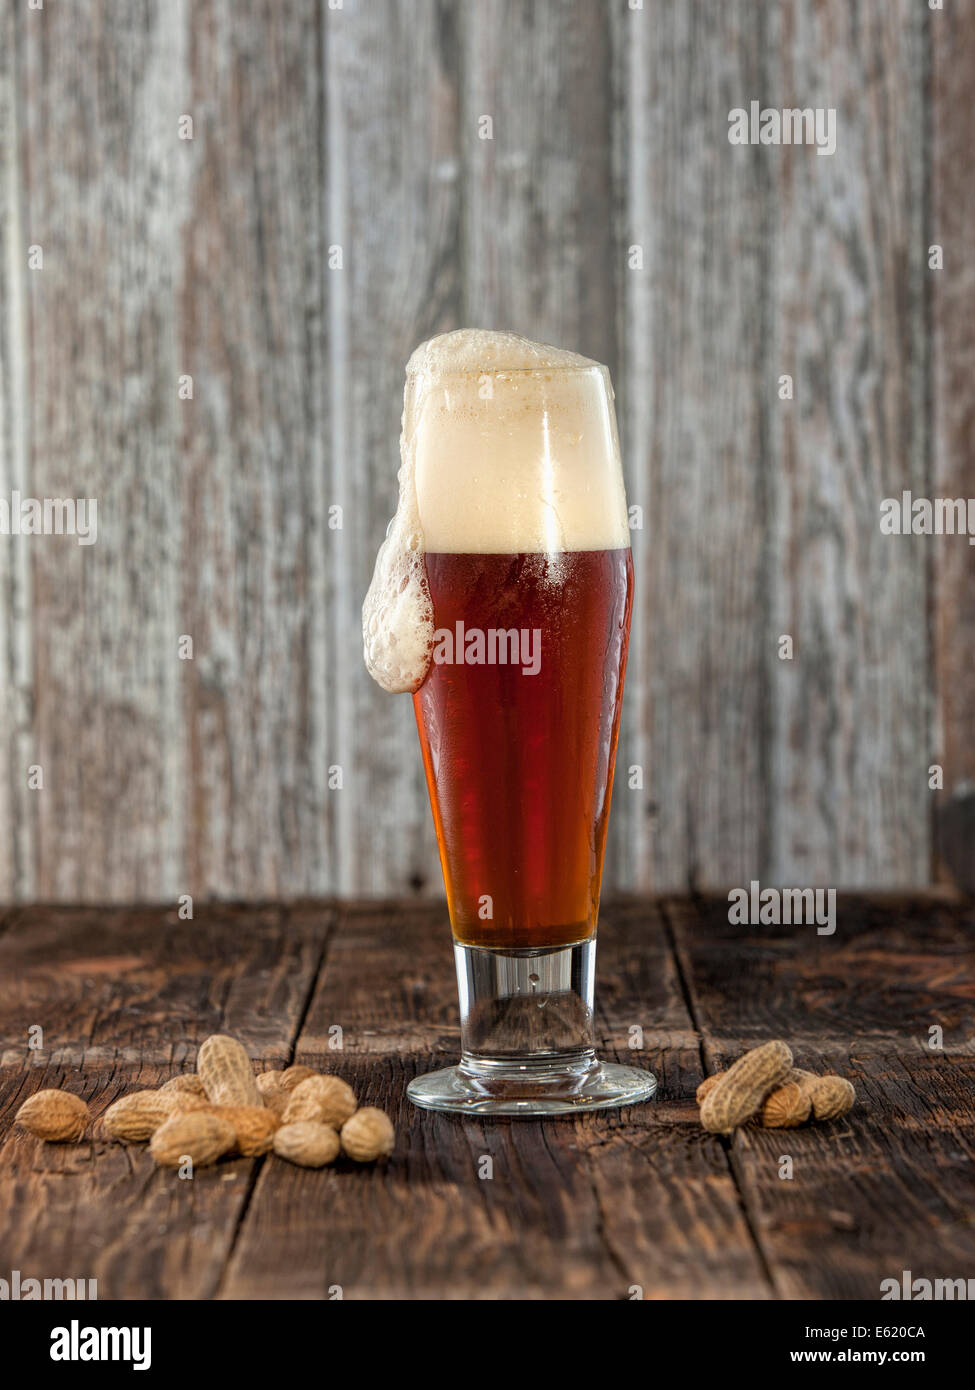 Peanuts and foaming beer. Stock Photo